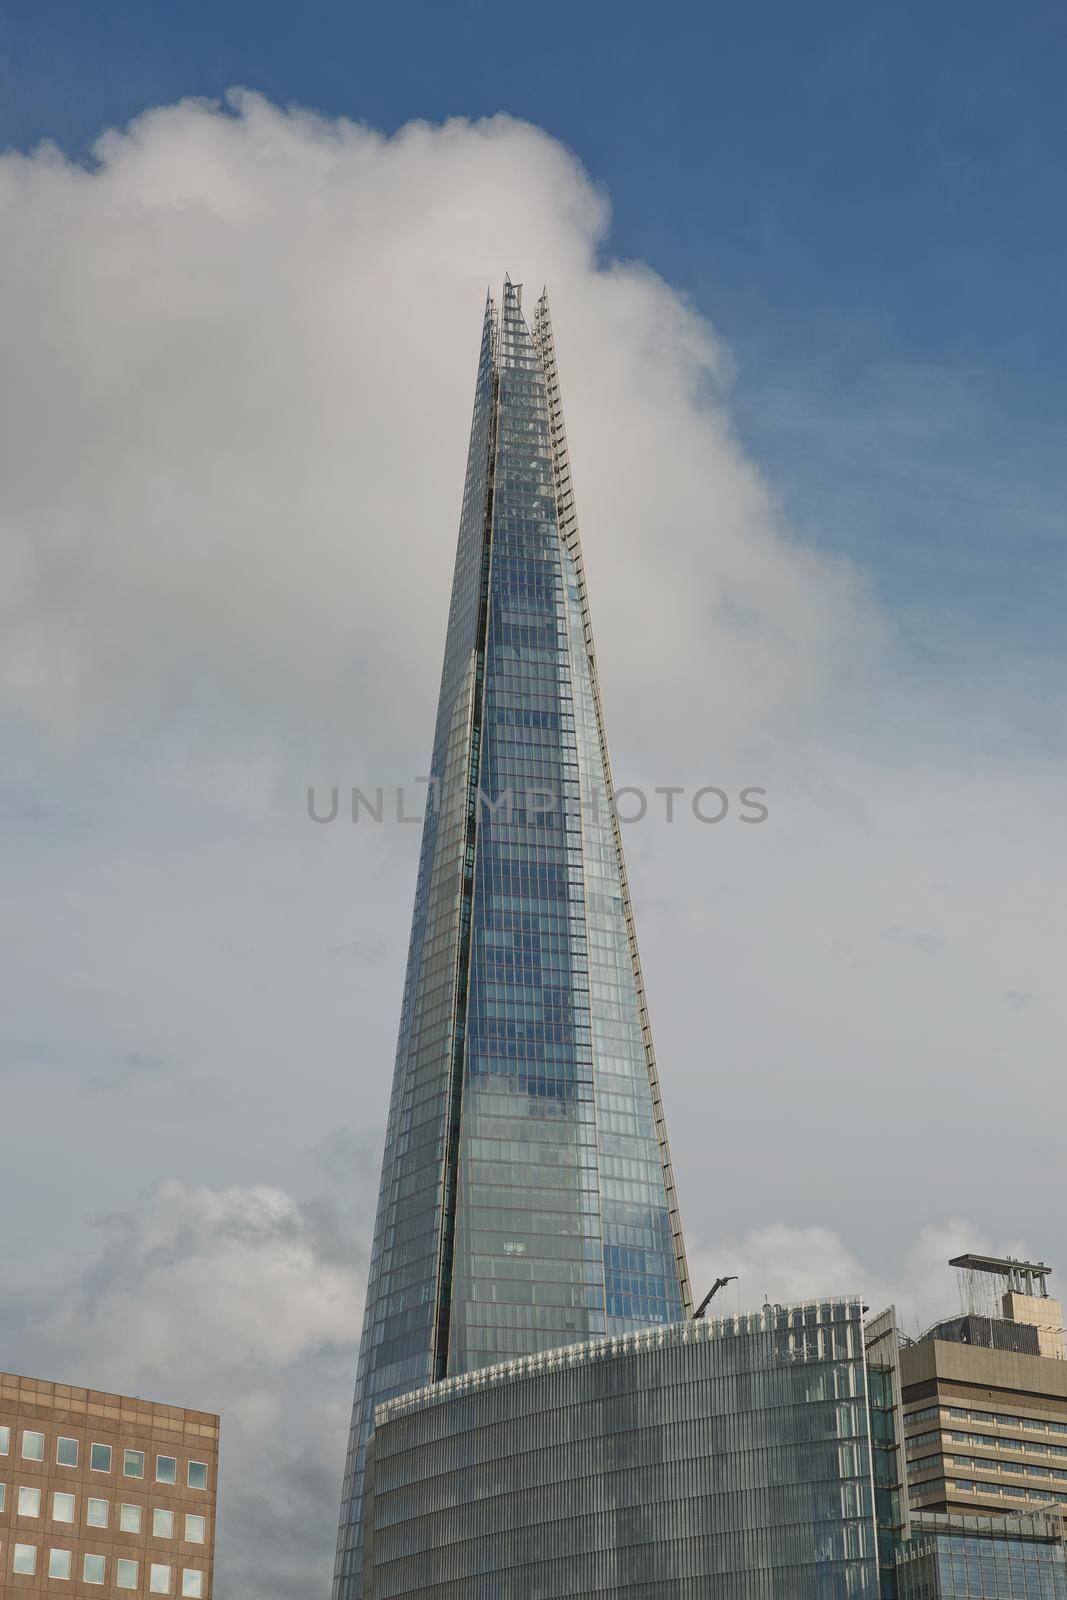 LONDON, UK - SEPTEMBER 08, 2017: Renzo Piano new skyscraper 'The Shard' in London. The 95-story Shard, standing at 310 meters (1,016 feet), is the tallest building in Western Europe.